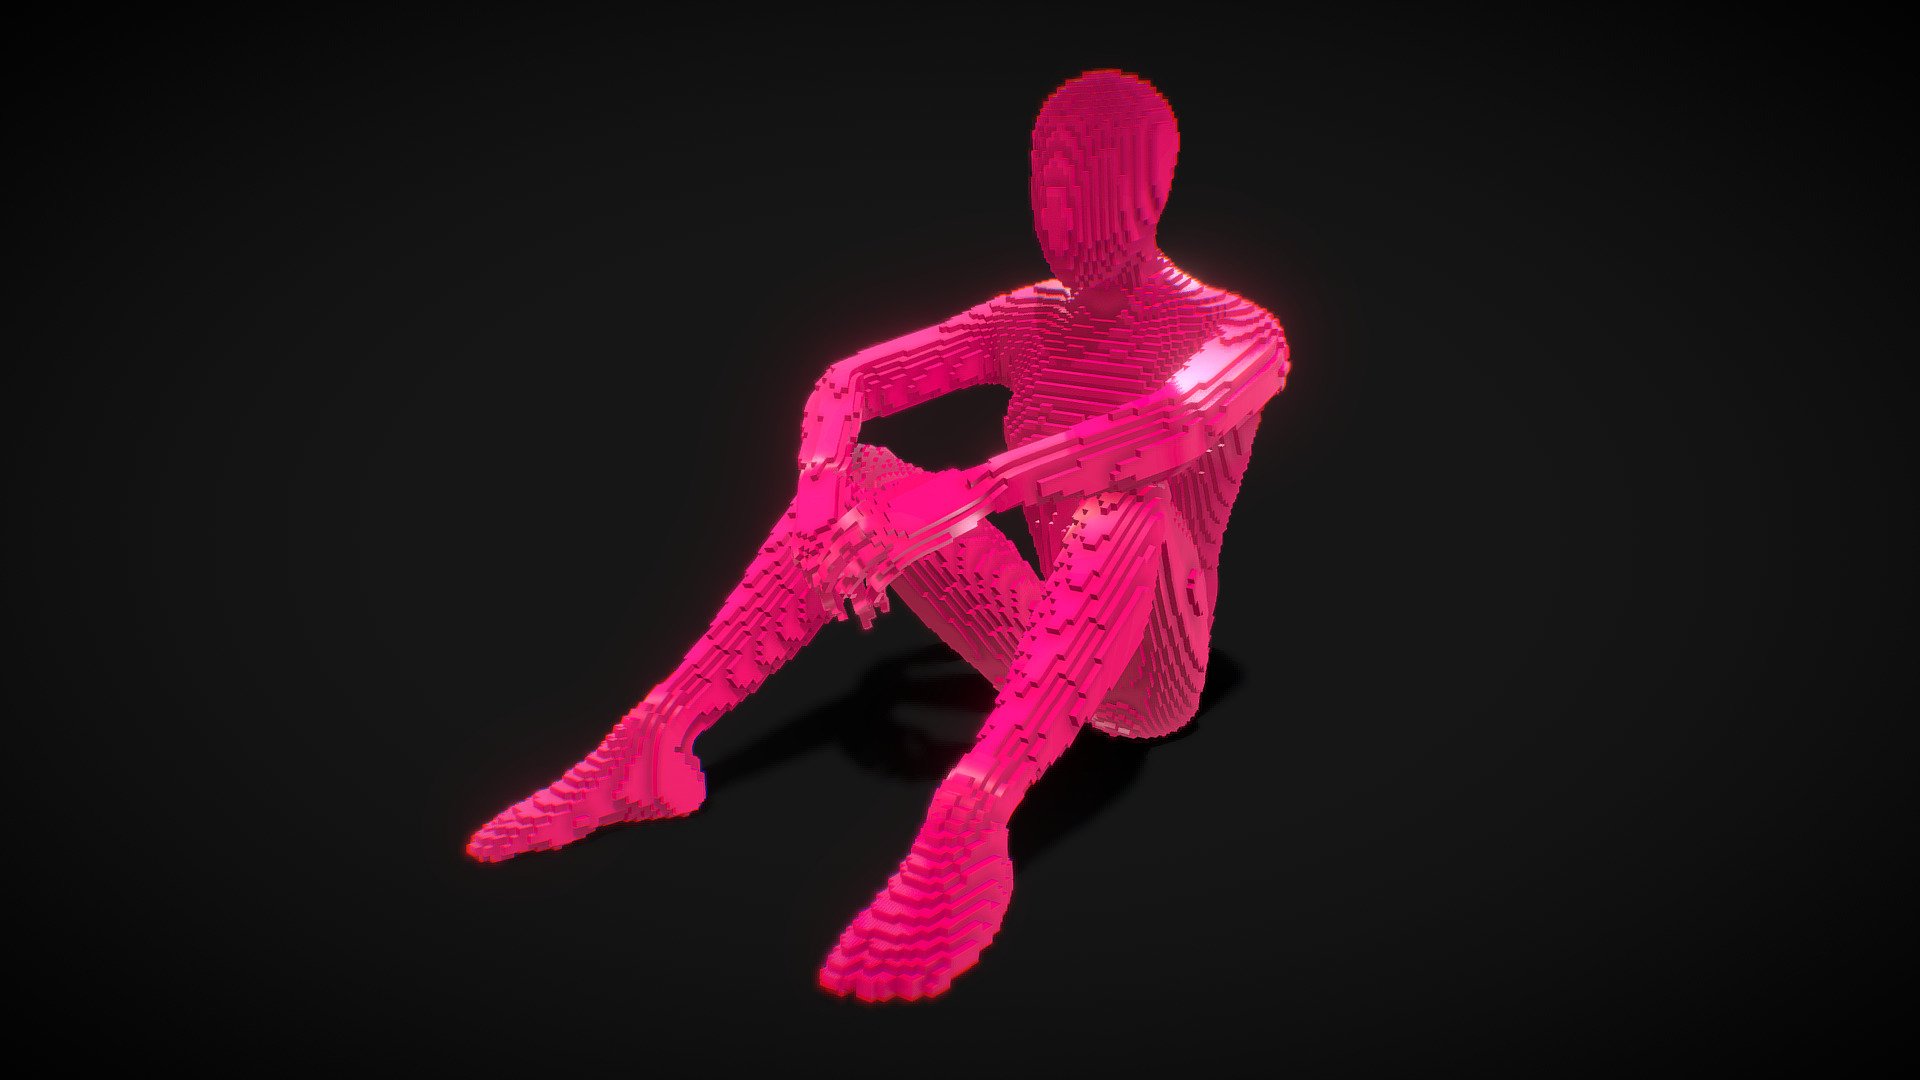 ( If you want custom texture, you can ask me and I post new model with your request so you can buy it )

About the content:

Rigged

About the process:

Made in Blender
No textures, you can play with materials or shaders

by Lucid Dreams visuals

www.luciddreamsvisuals.com.ar - Voxel Manequin - Sitting Pose - Buy Royalty Free 3D model by Lucid Dreams (@vjluciddreams) 3d model